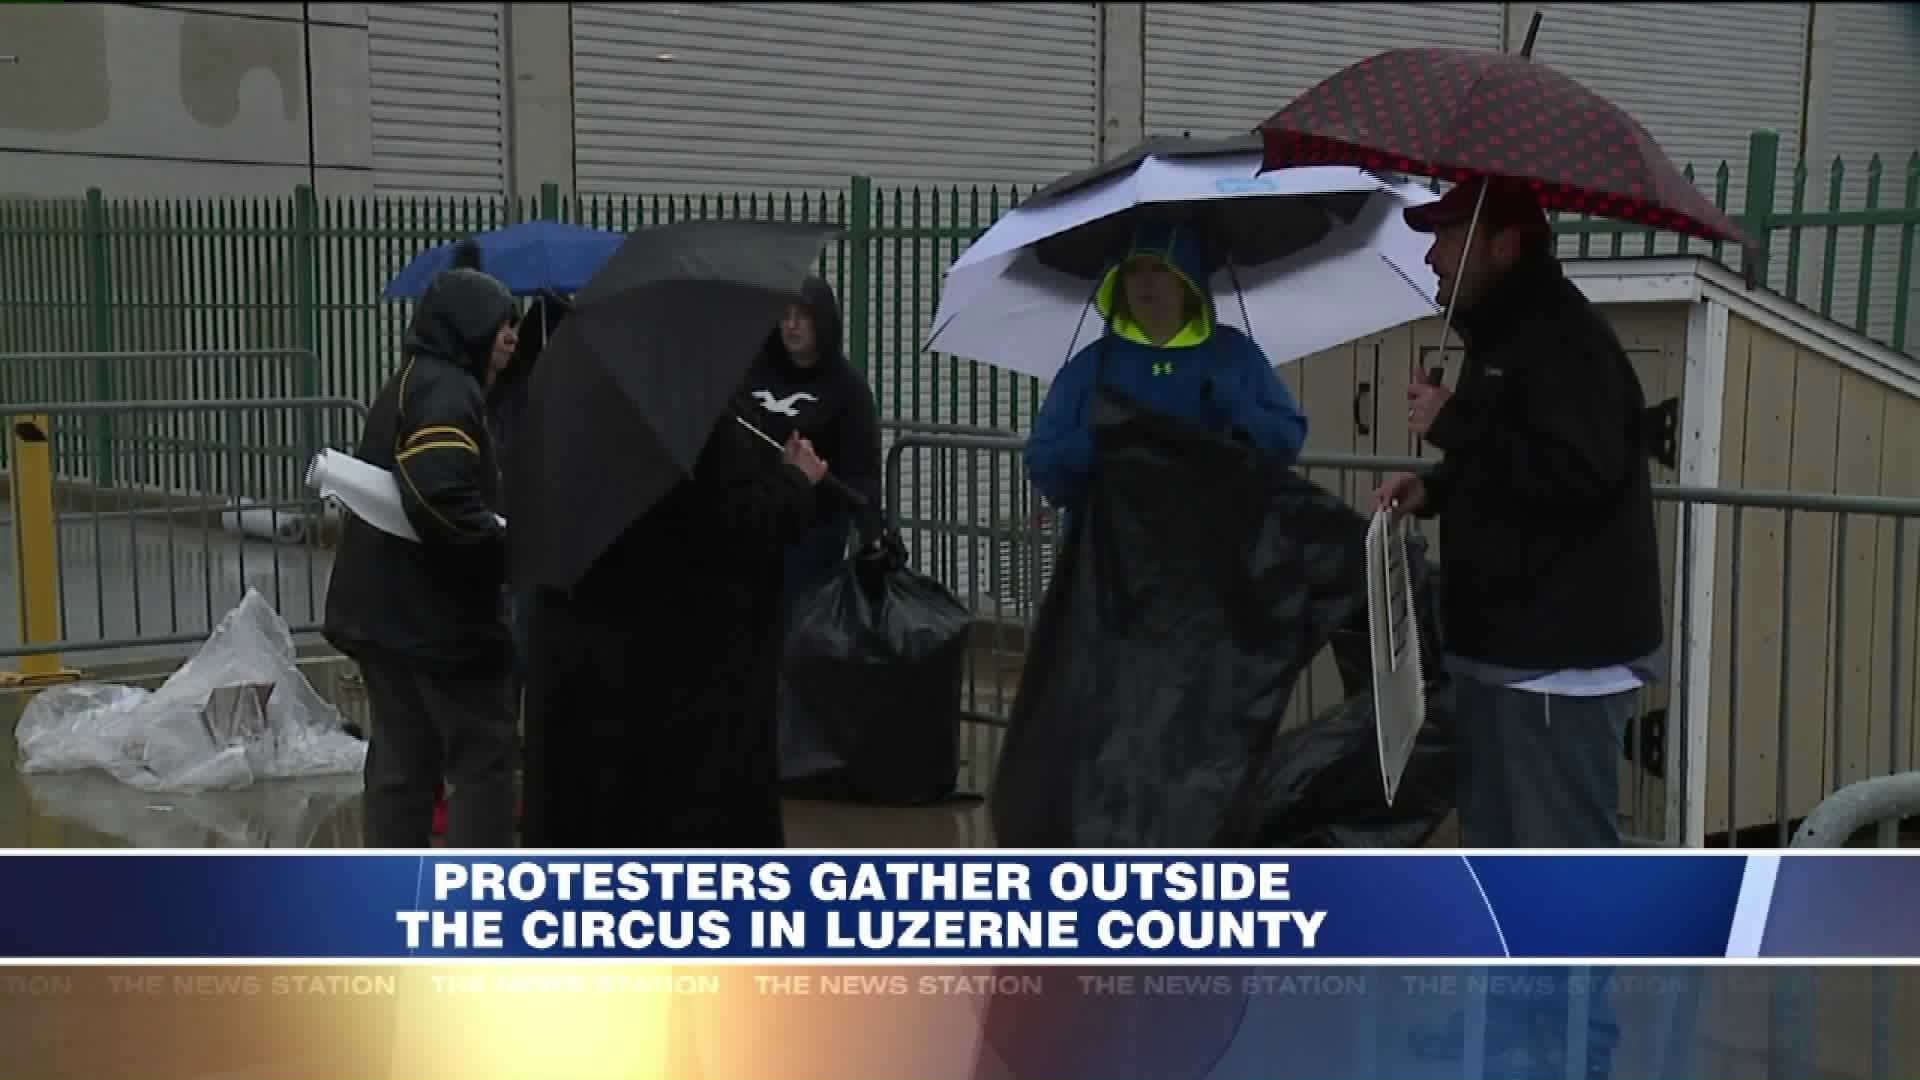 Protestors Gather Outside Final Circus in Luzerne County